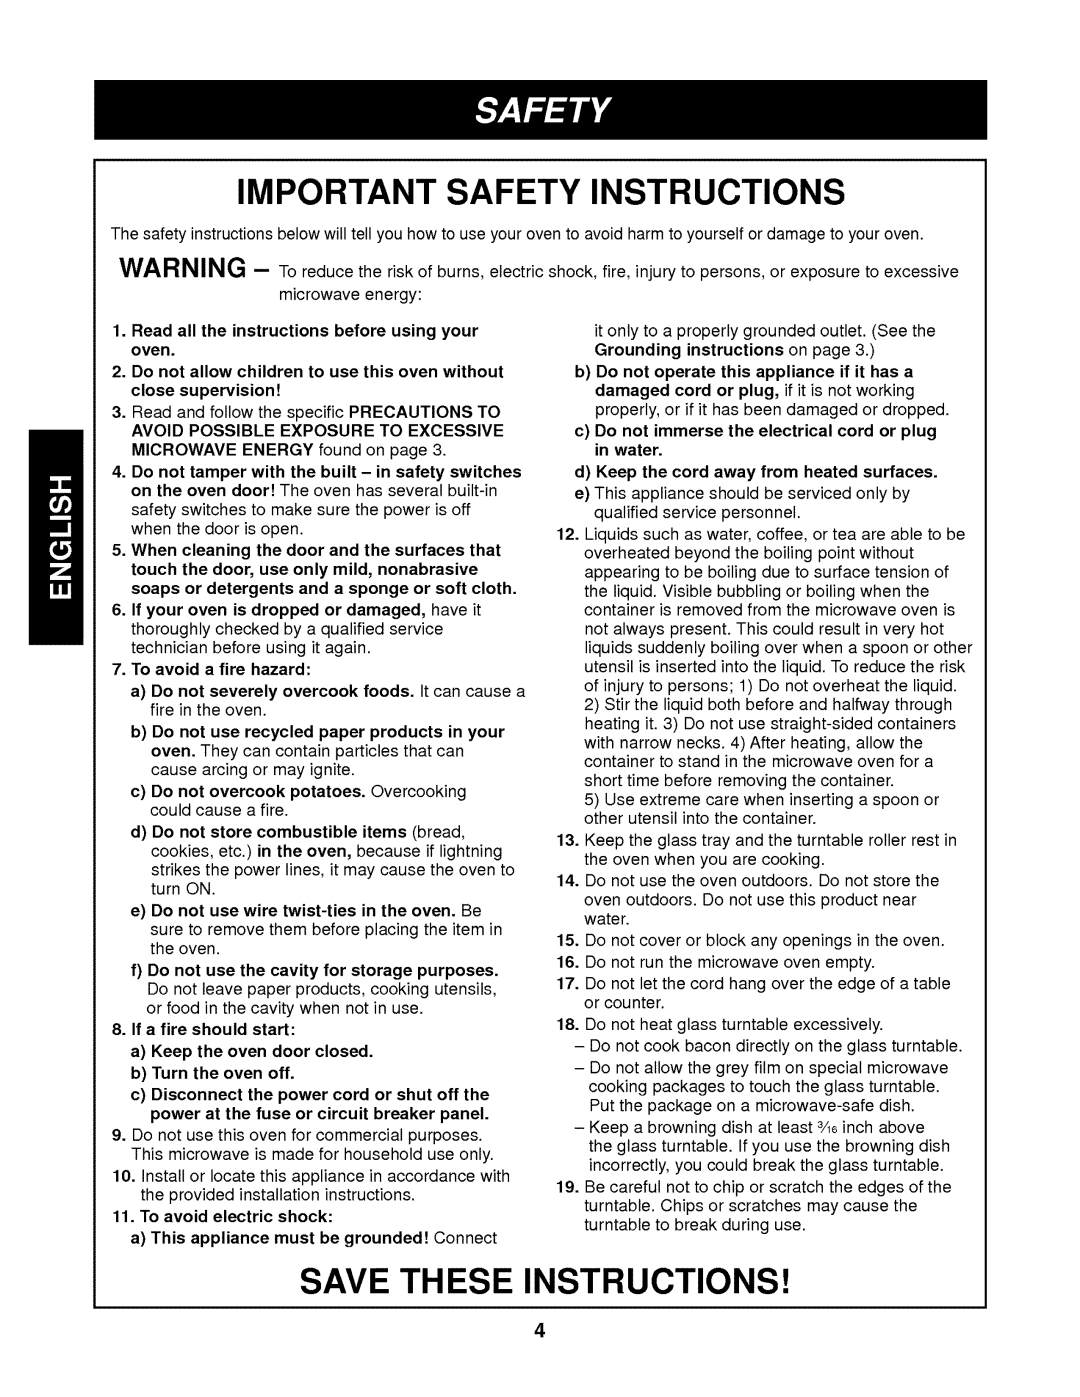 Kenmore 721.62342 manual Important Safety Instructions, Save These Instructions 